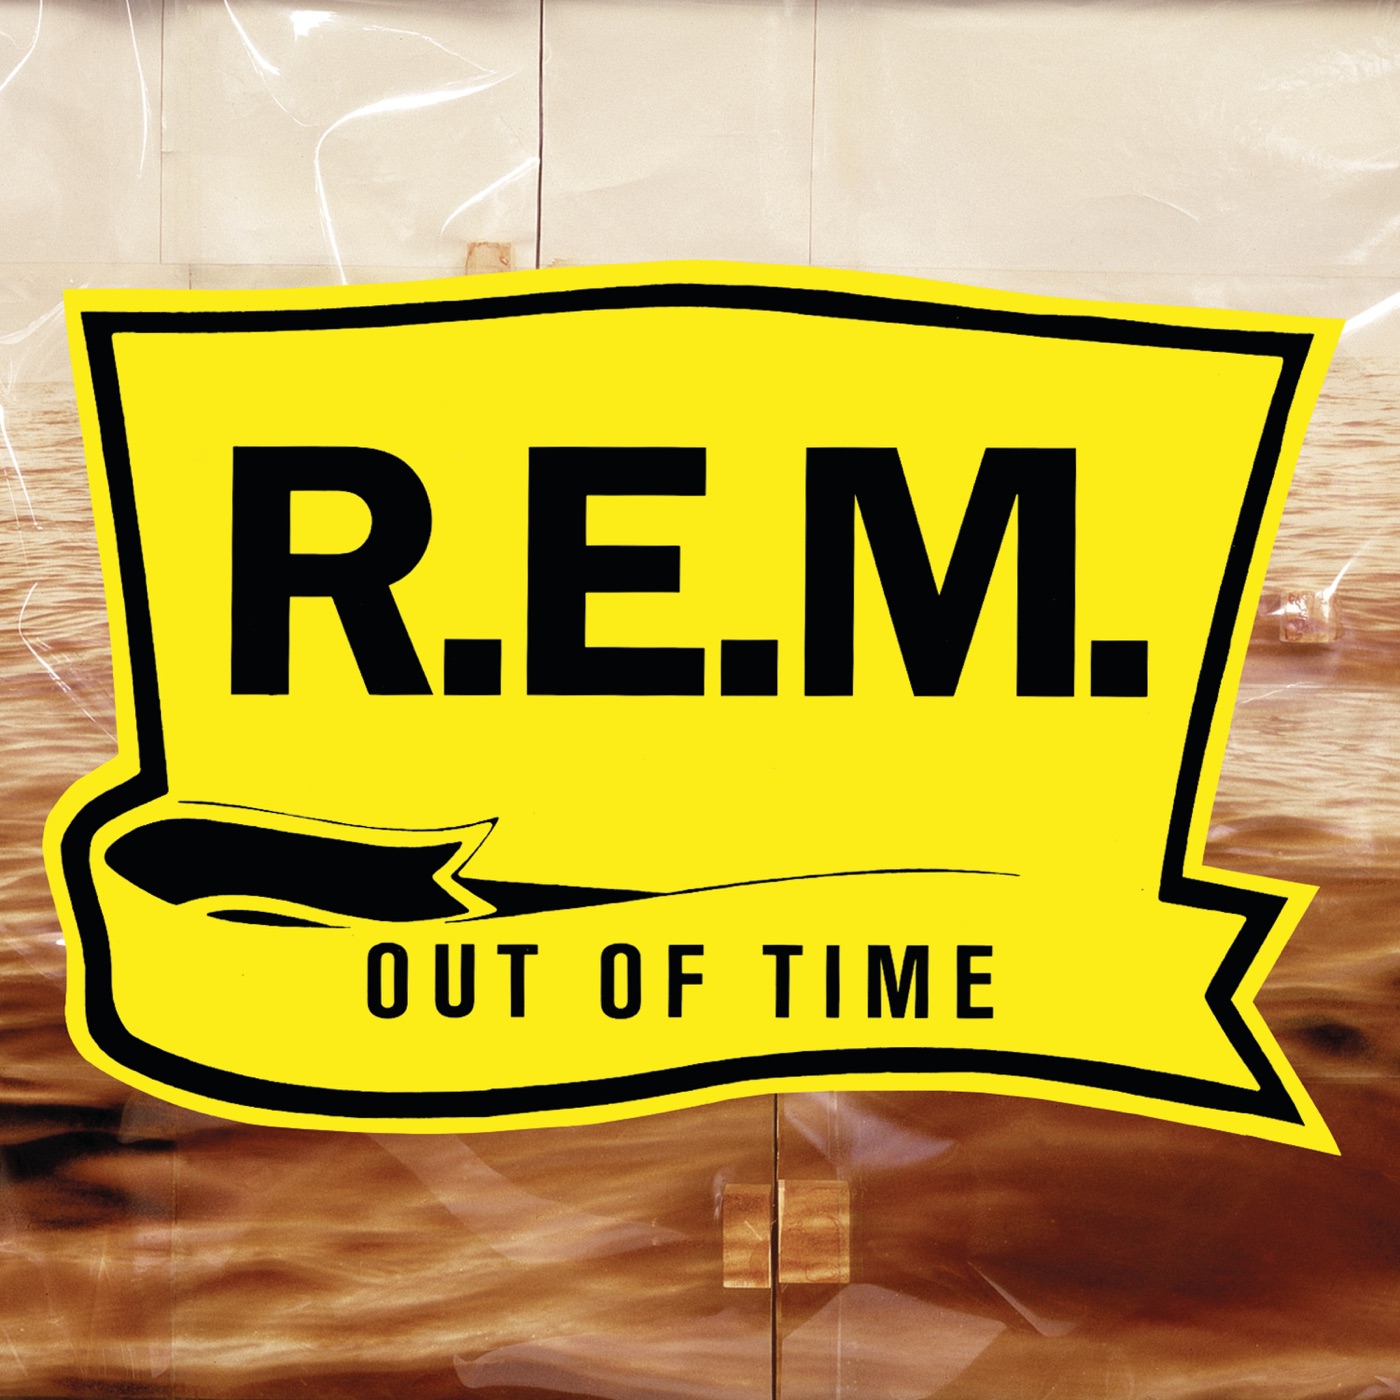 Out of Time by R.E.M.